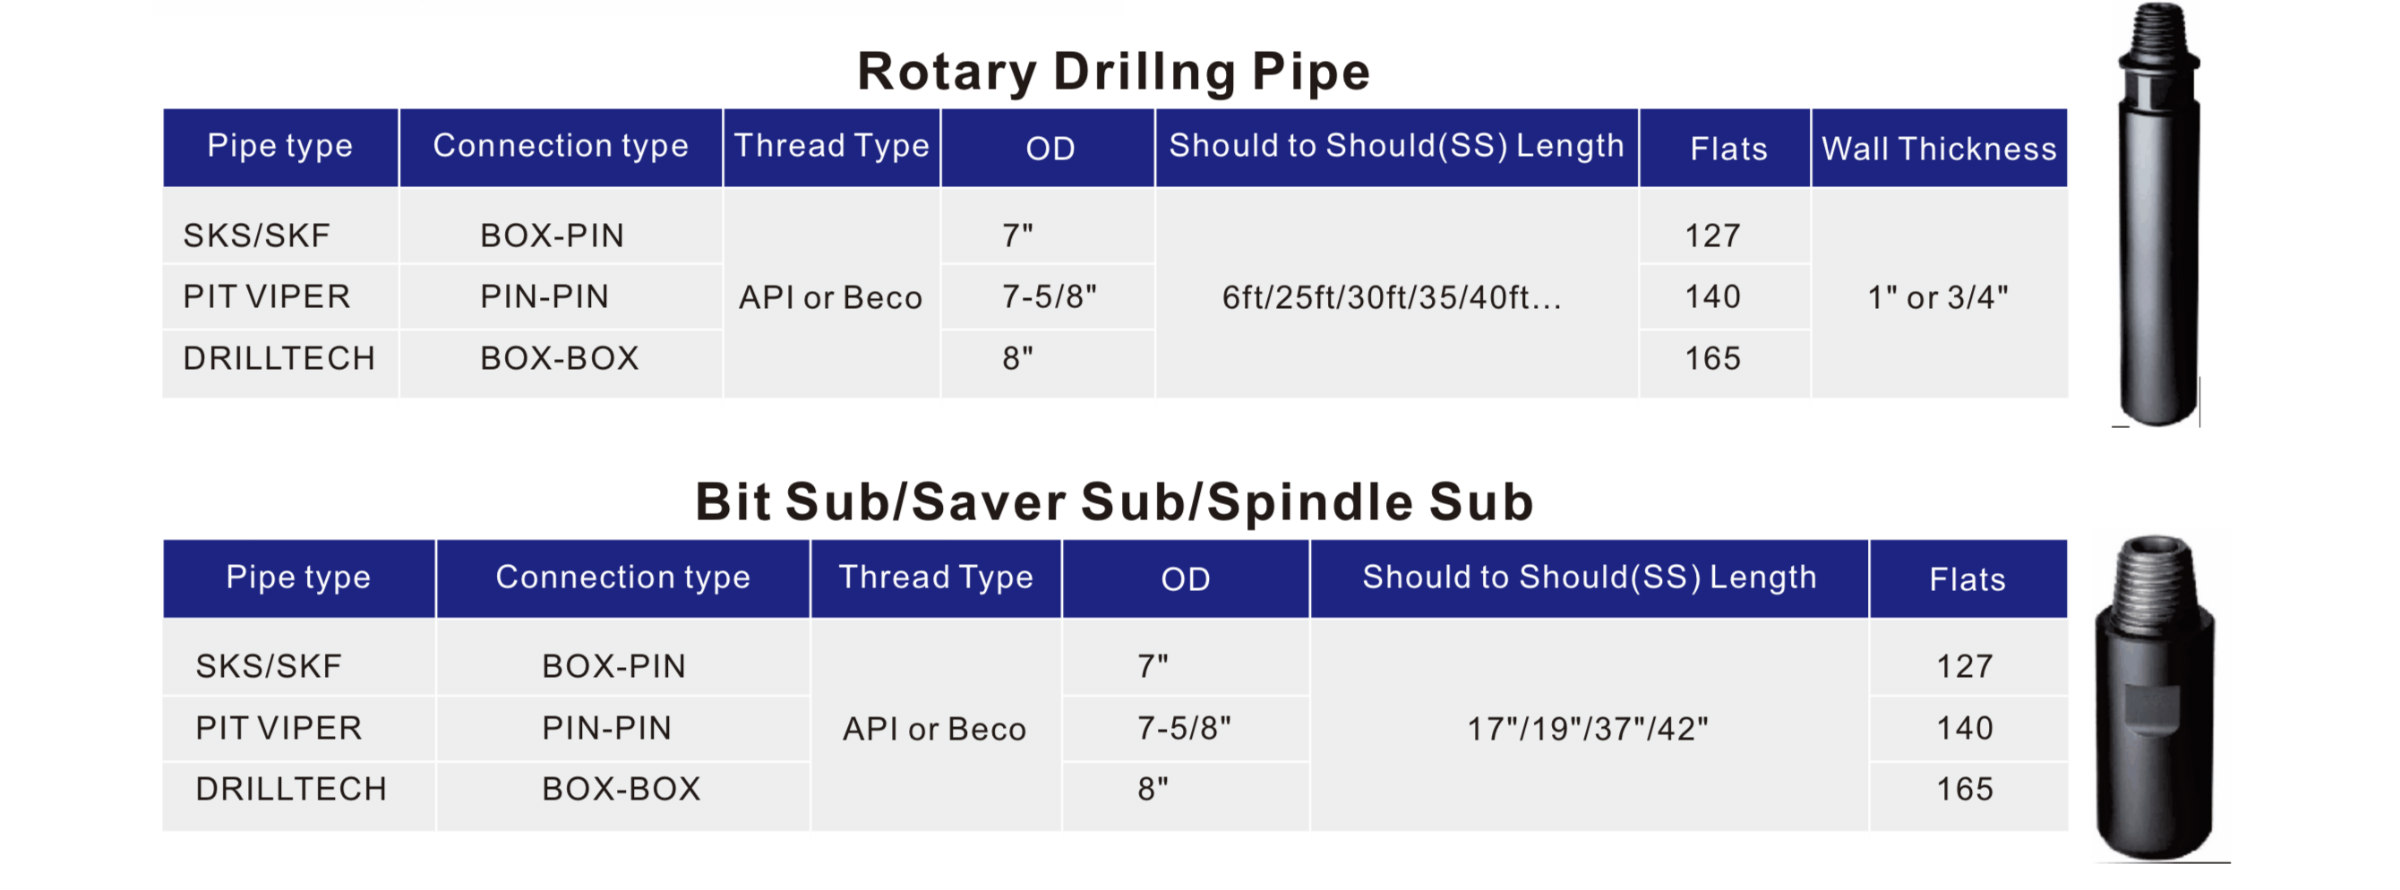 Black Diamond Drilling Rotary Drilling Pipe and Subs specifications